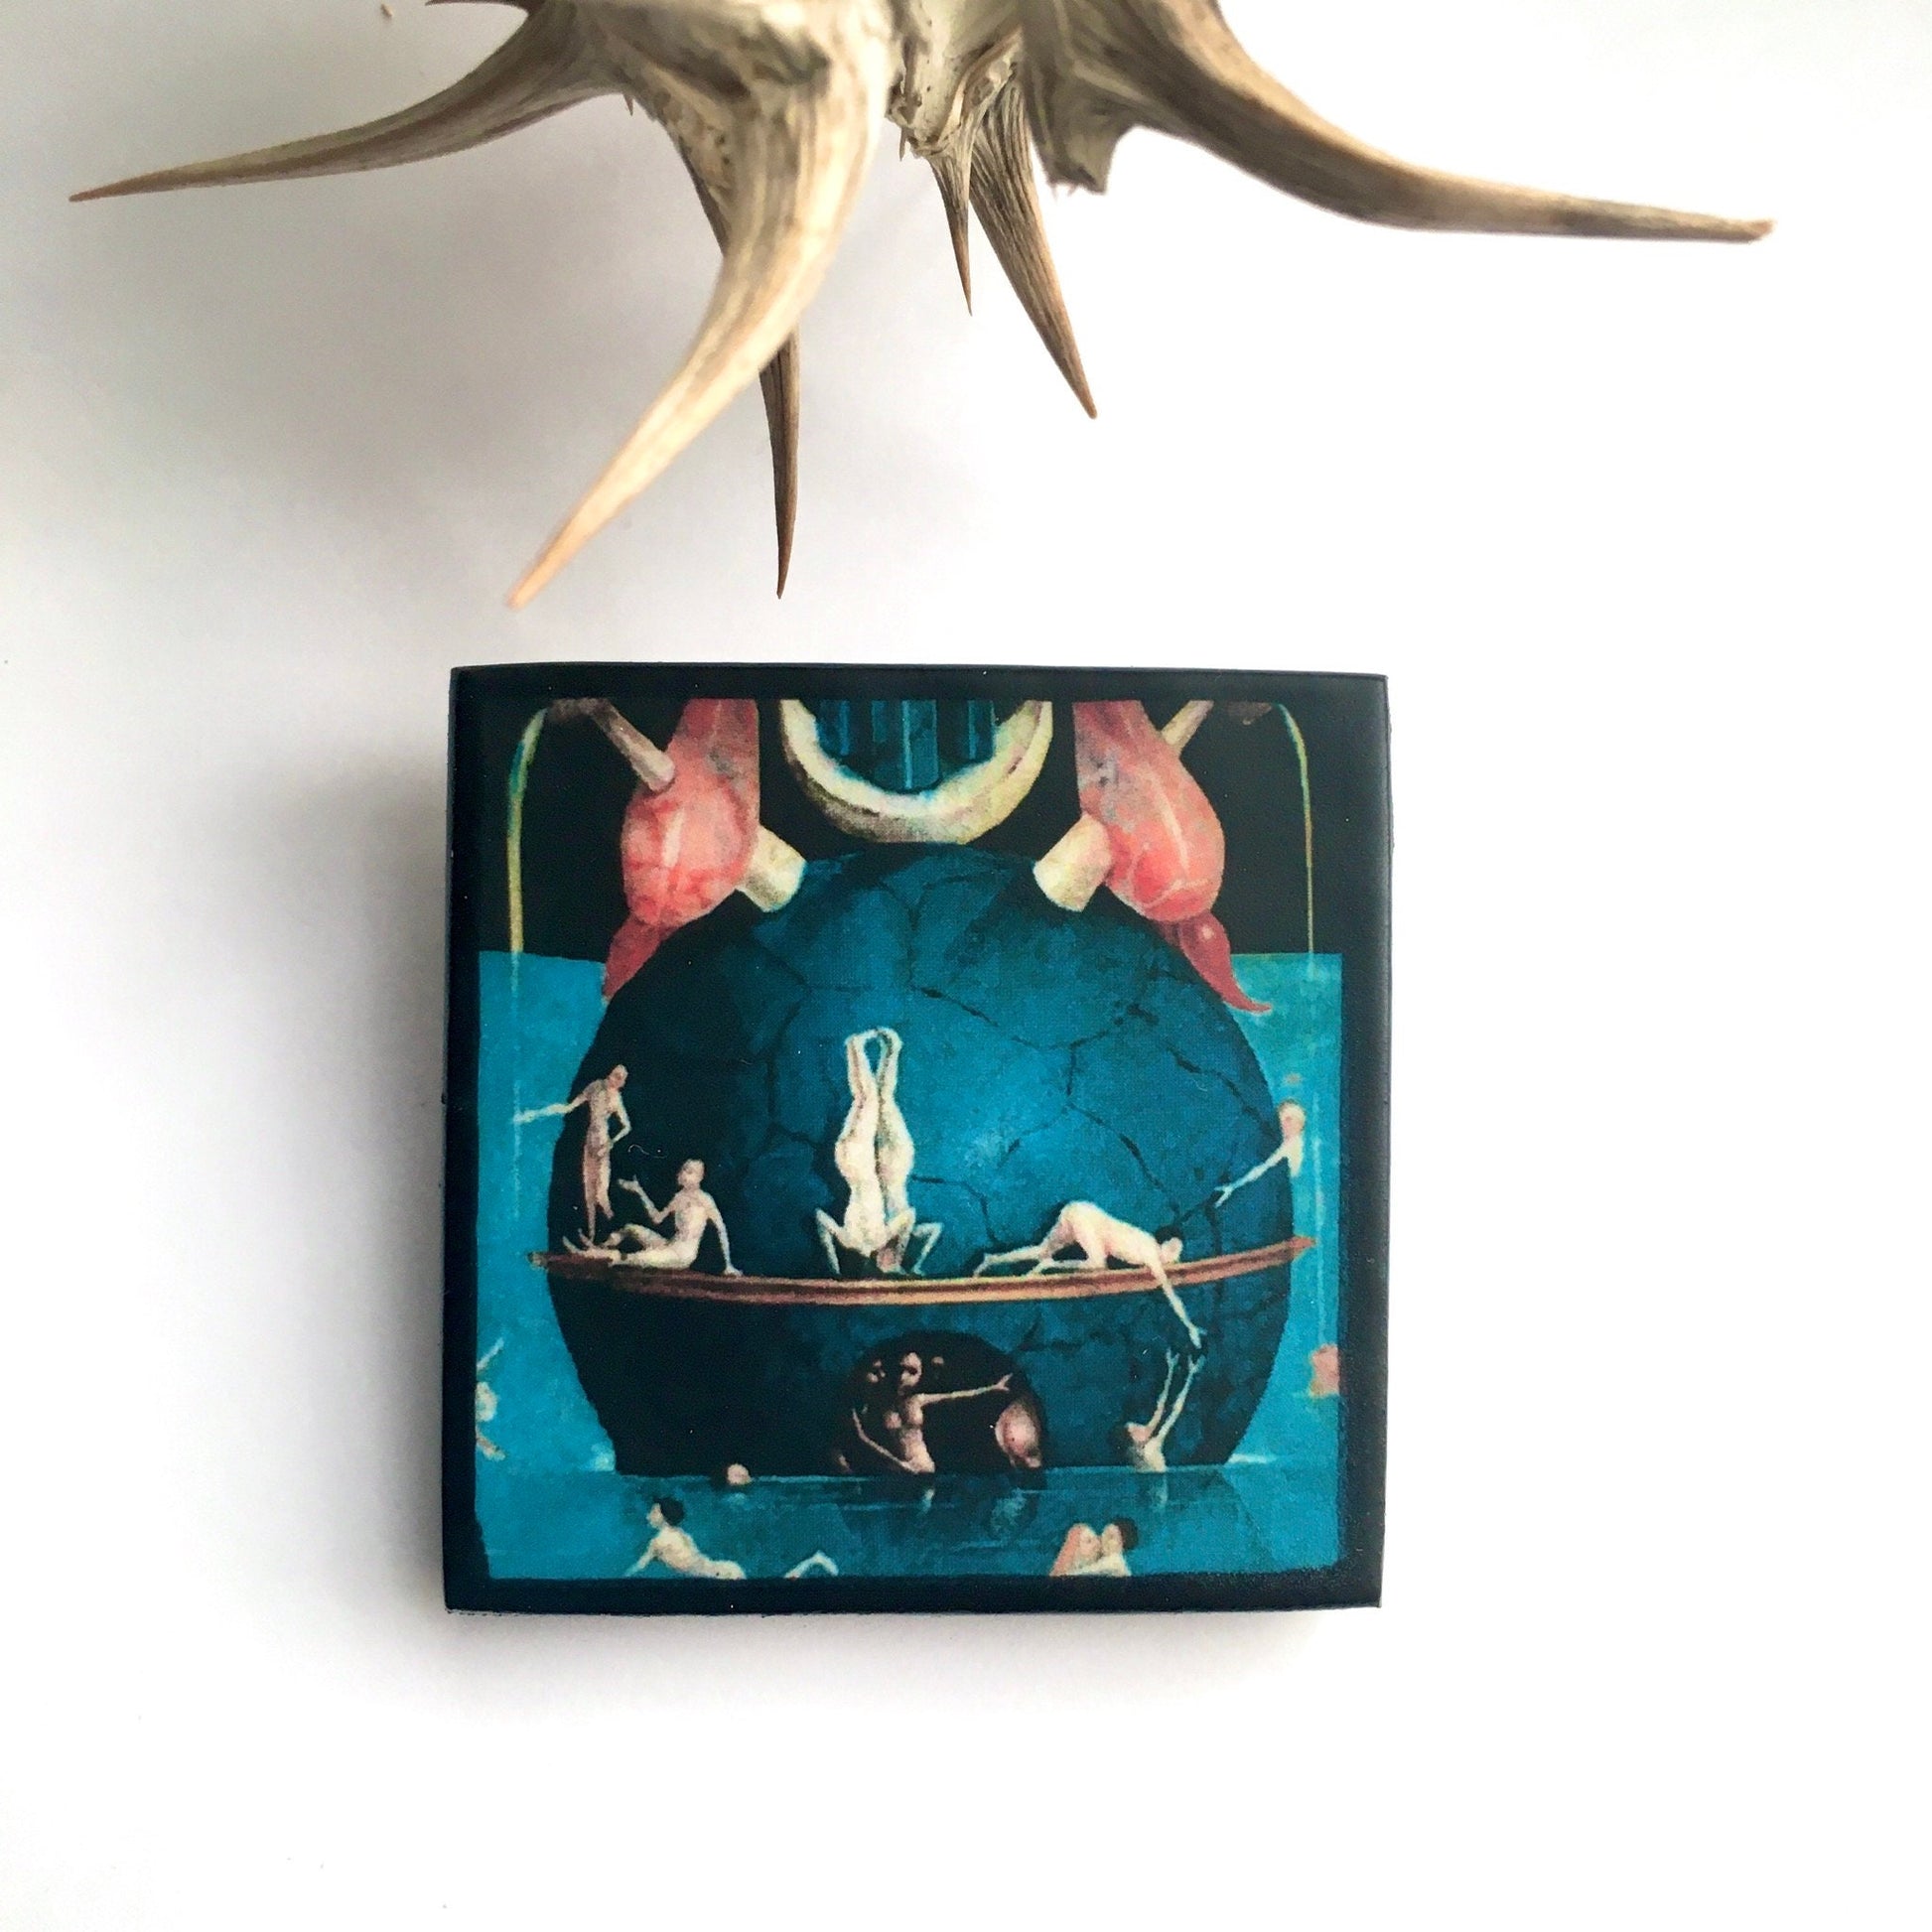 Blue unisex wooden 4, 3 cm squared brooch, inspired by Hieronymus Bosch painting "The Garden of Earthly Delights".